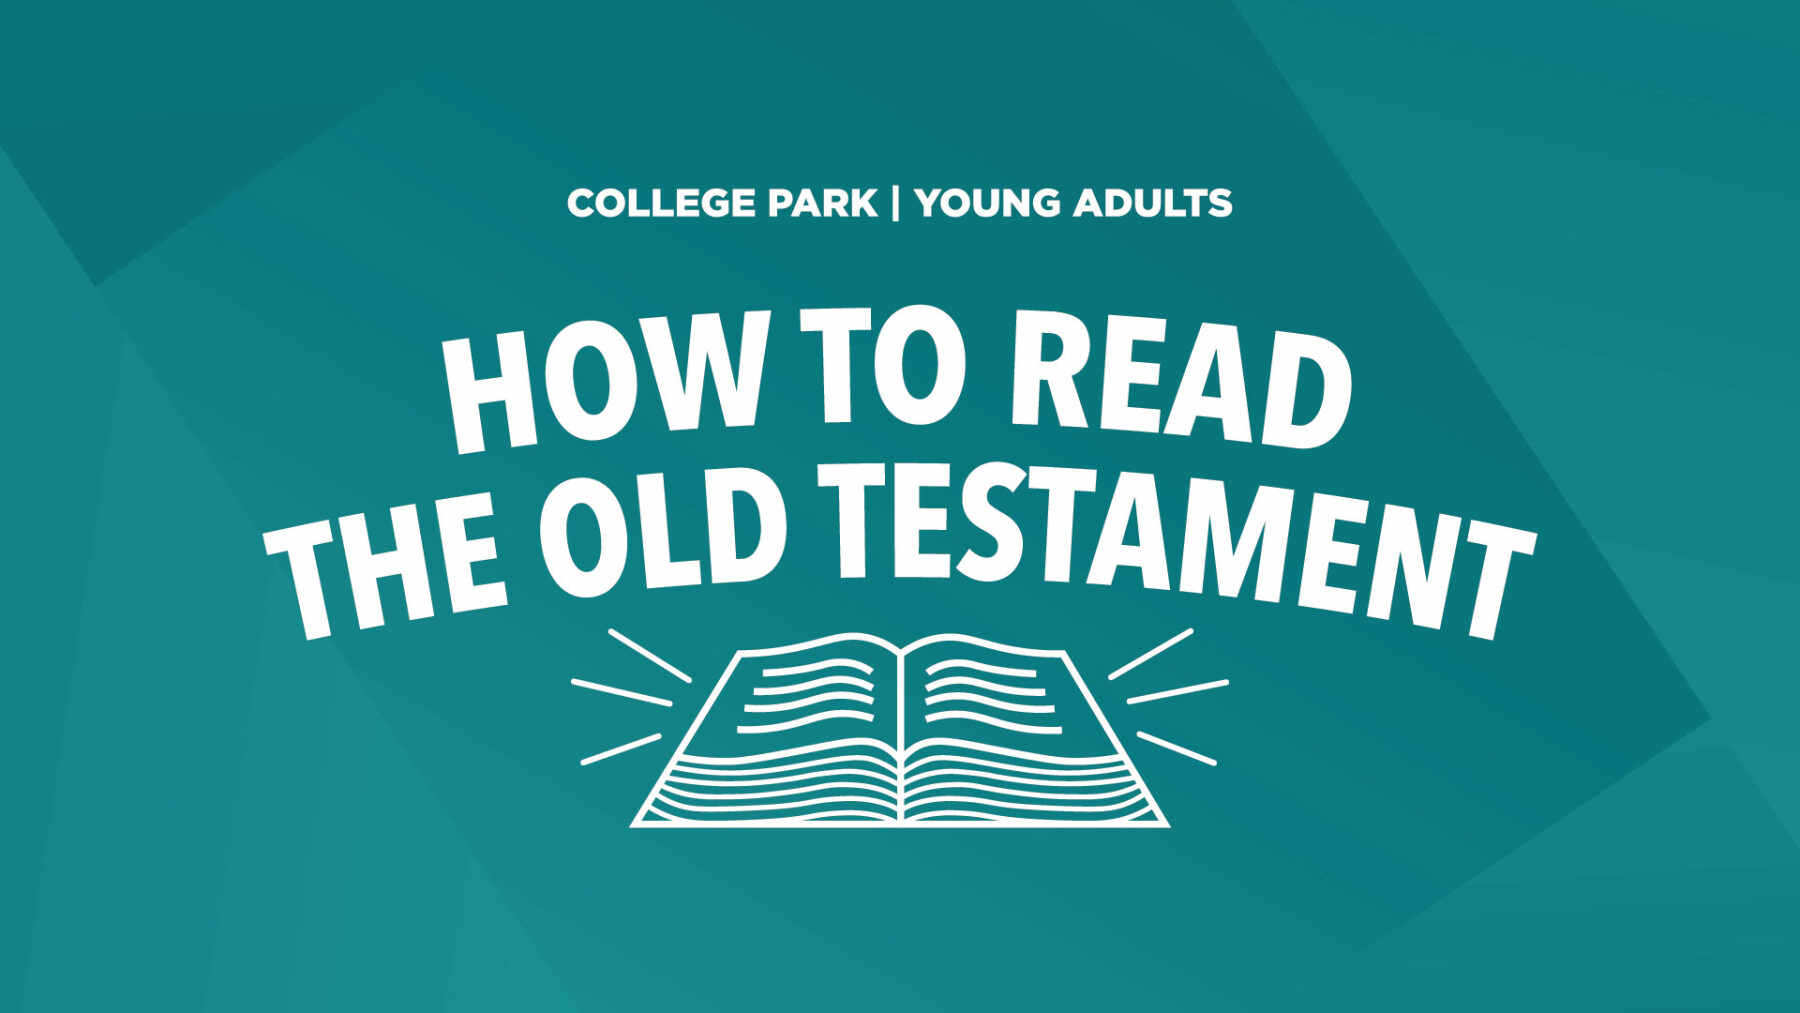 College Park & Young Adults: How to Read the Old Testament